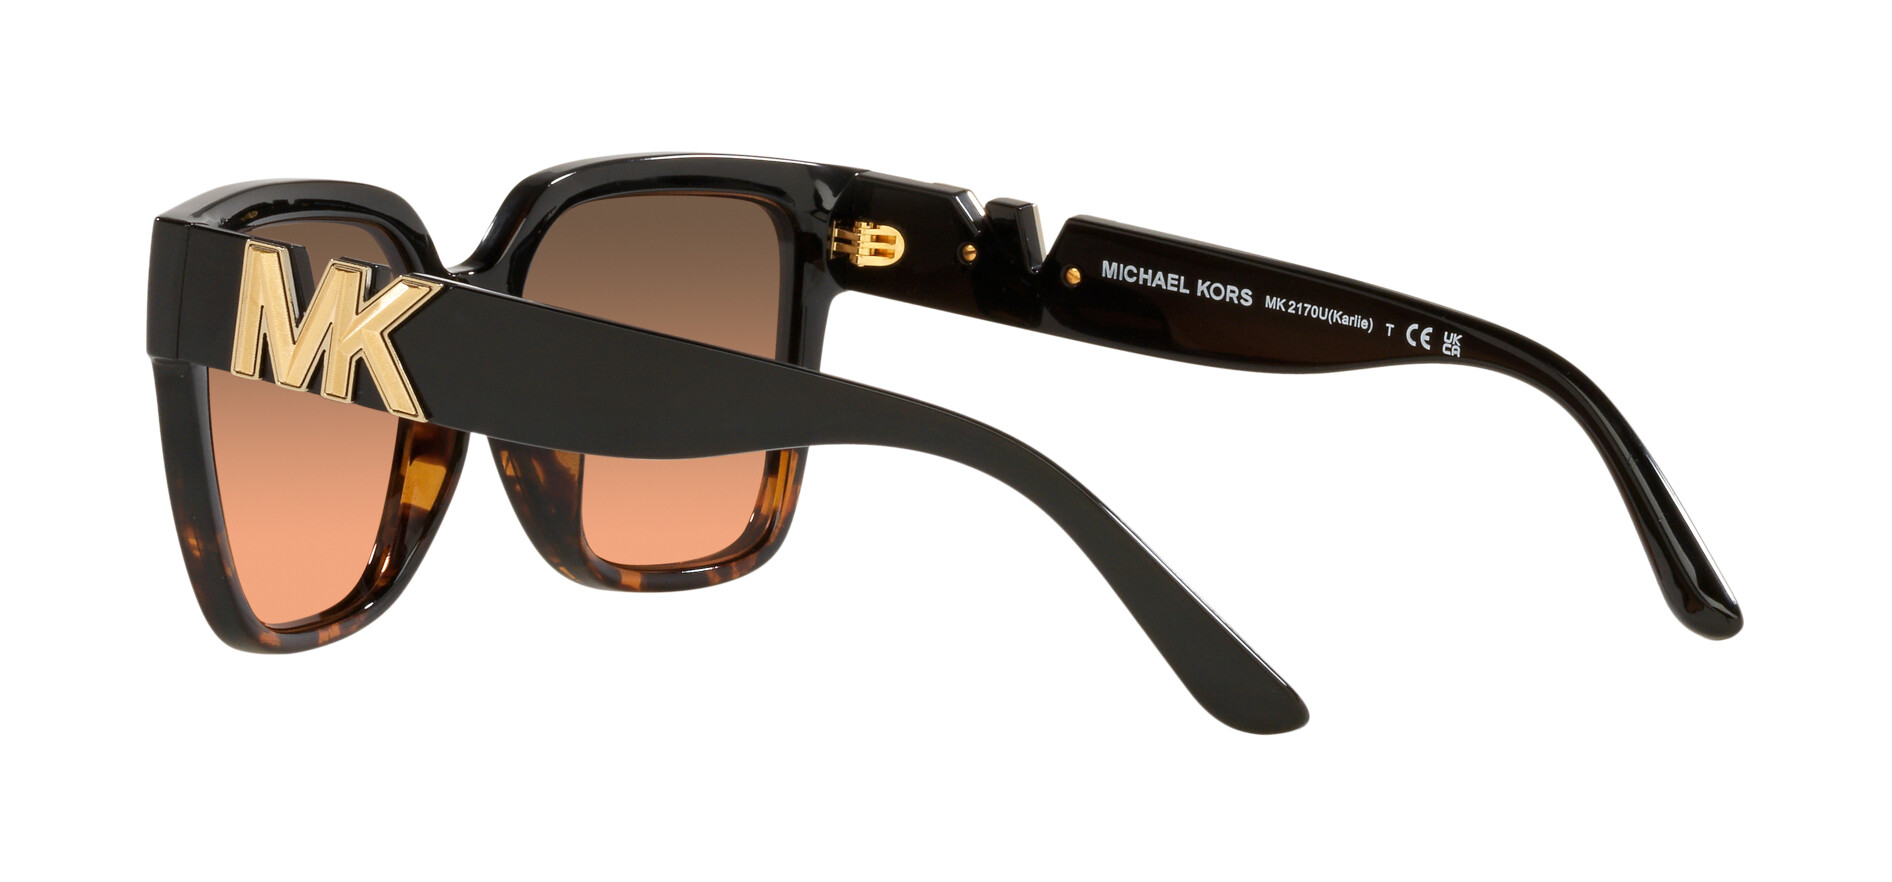 [products.image.angle_right02] Michael Kors KARLIE 0MK2170U 390818 Sonnenbrille